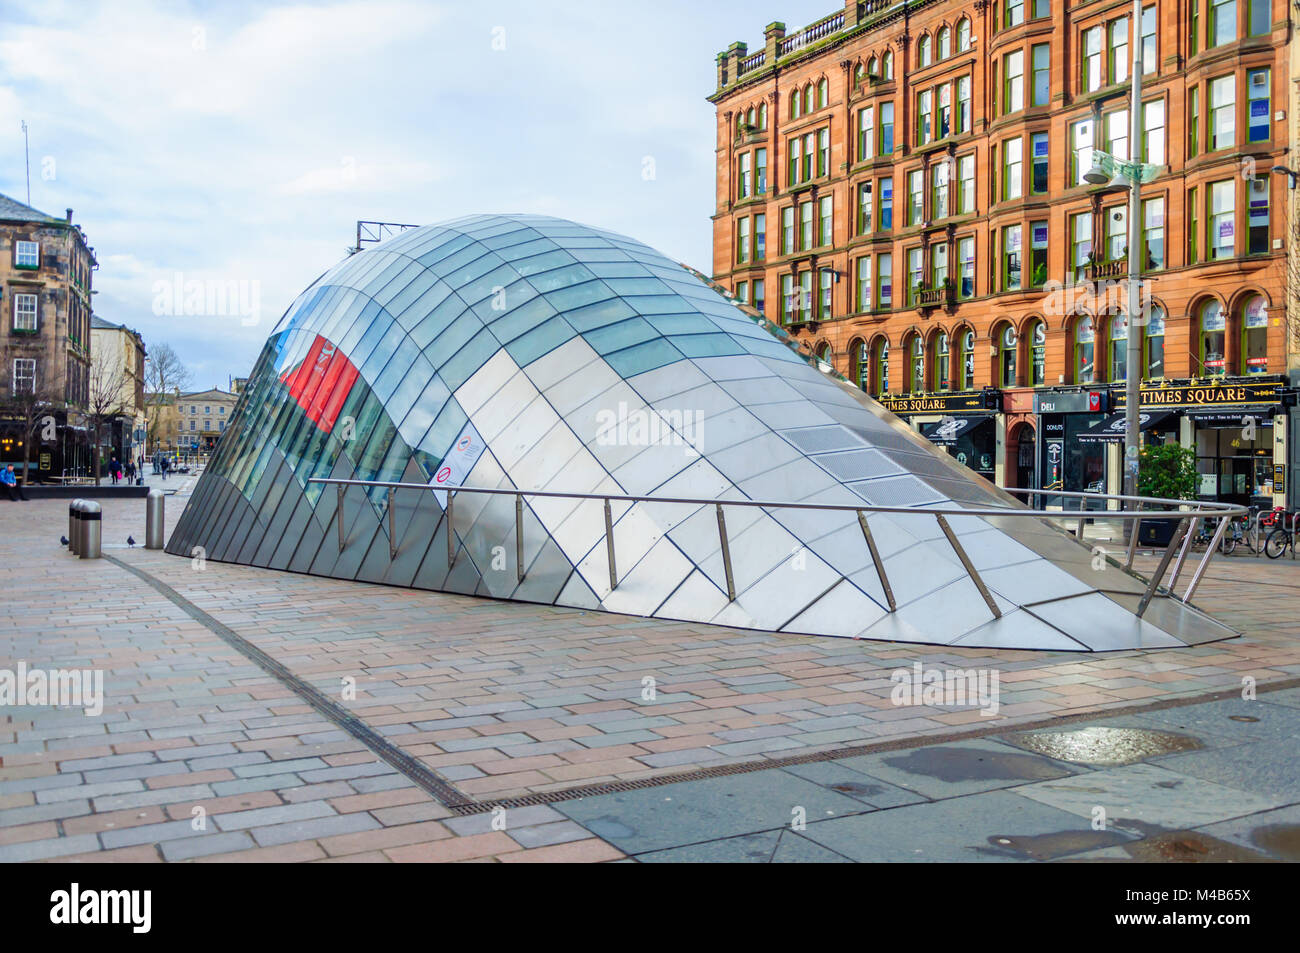 Modern design of the glass and steel canopy at the entrance of St. Enoch subway station at St Enoch Square, Glasgow, Scotland, UK Stock Photo